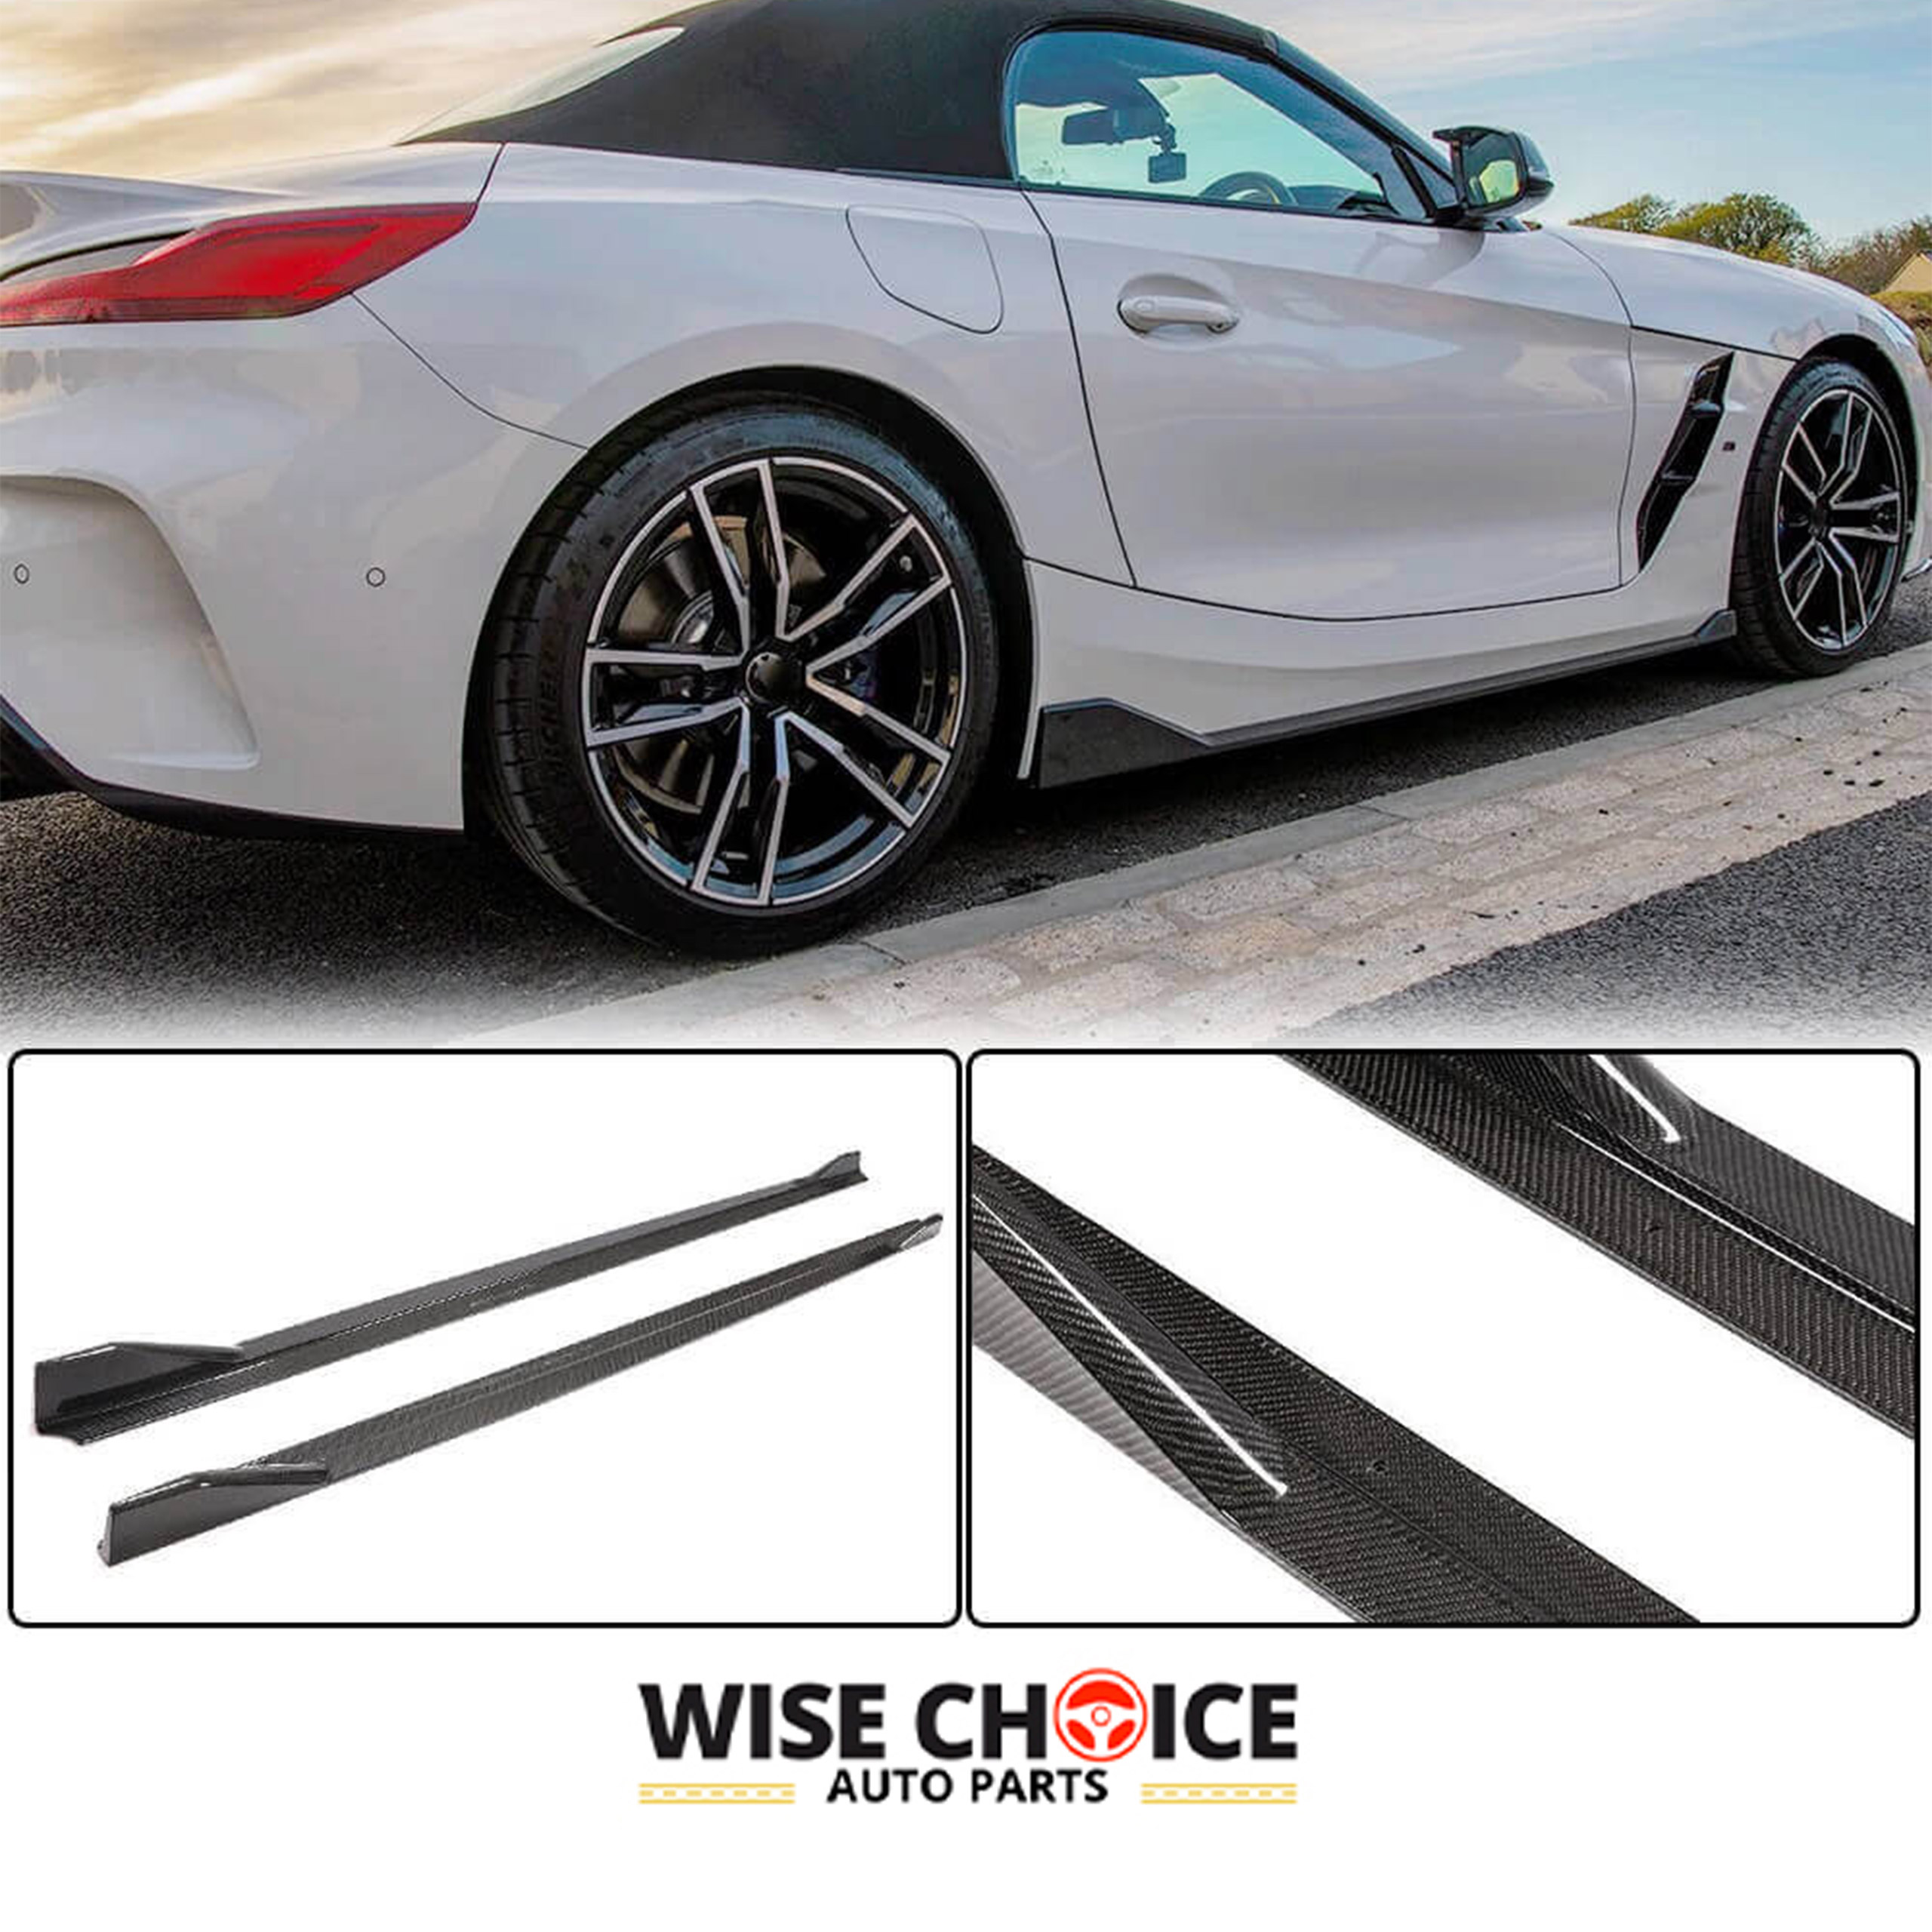 2019-2022 G29 BMW Z4 M-Sport model adorned with Carbon Fiber Side Skirts for enhanced style and aerodynamics.